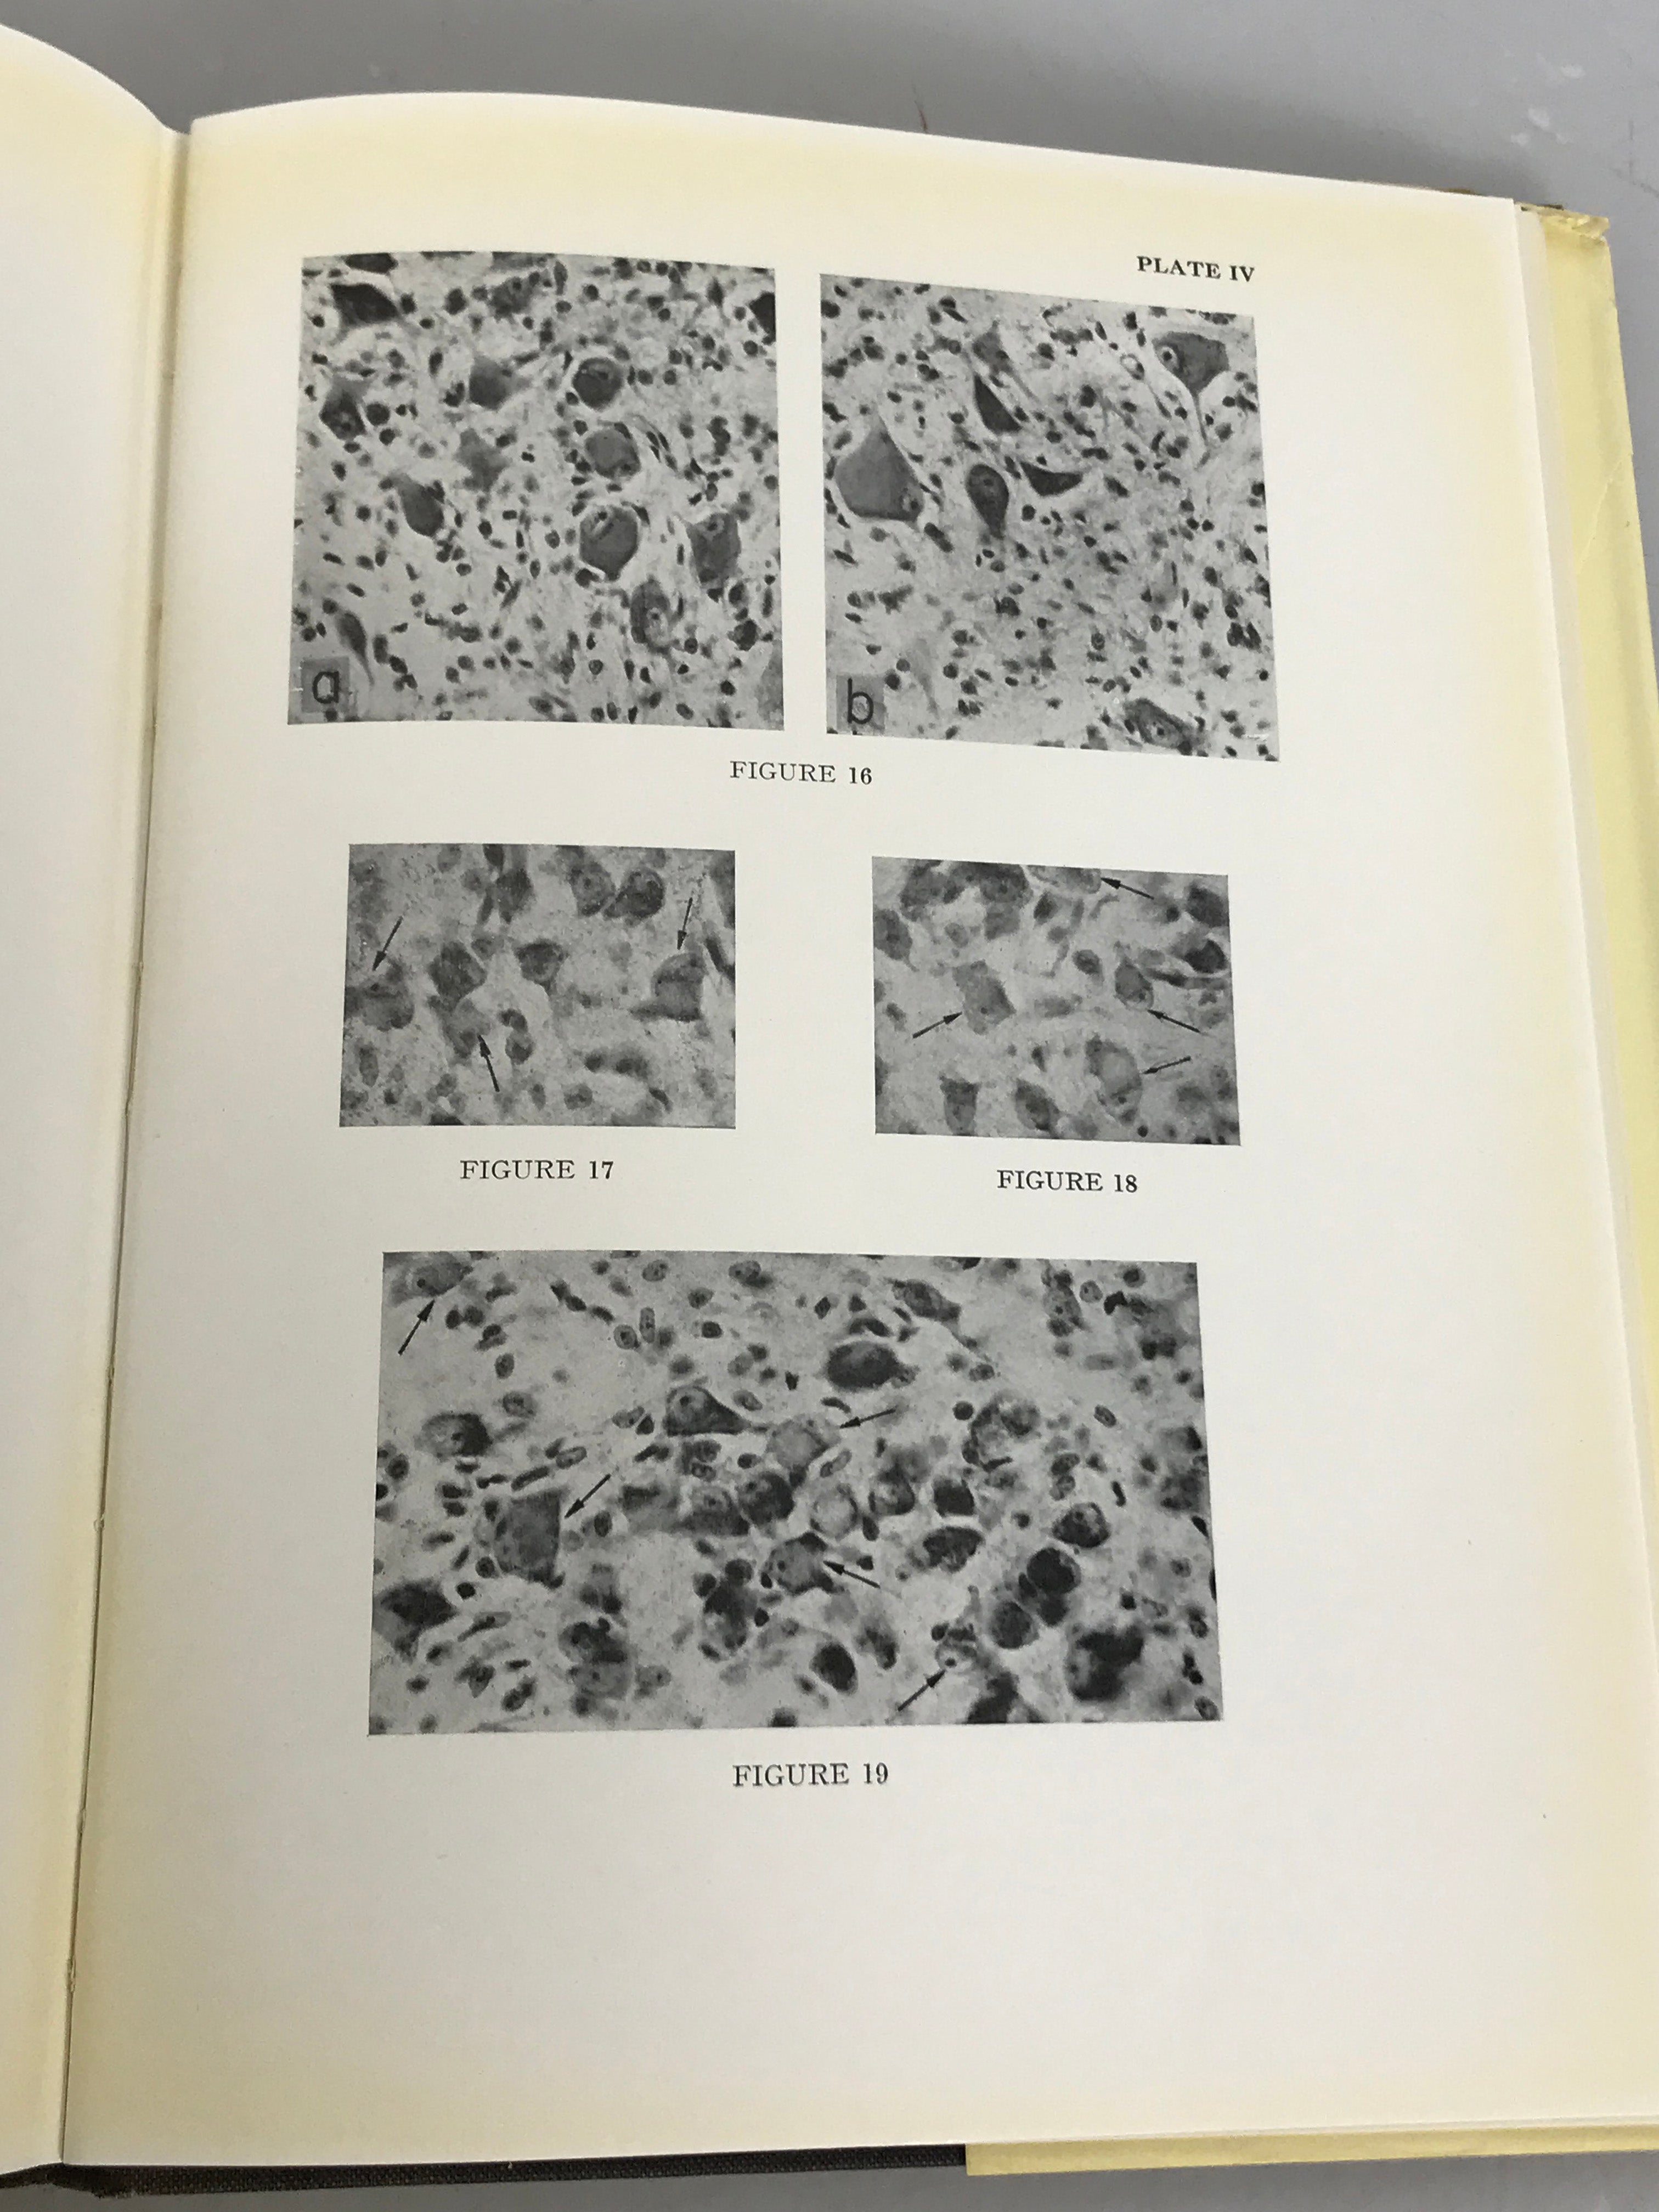 The Vestibular Nuclei and their Connections, Anatomy and Functional Correlations by Brodal, Pompeiano, and Walberg 1962 First Edition HC DJ